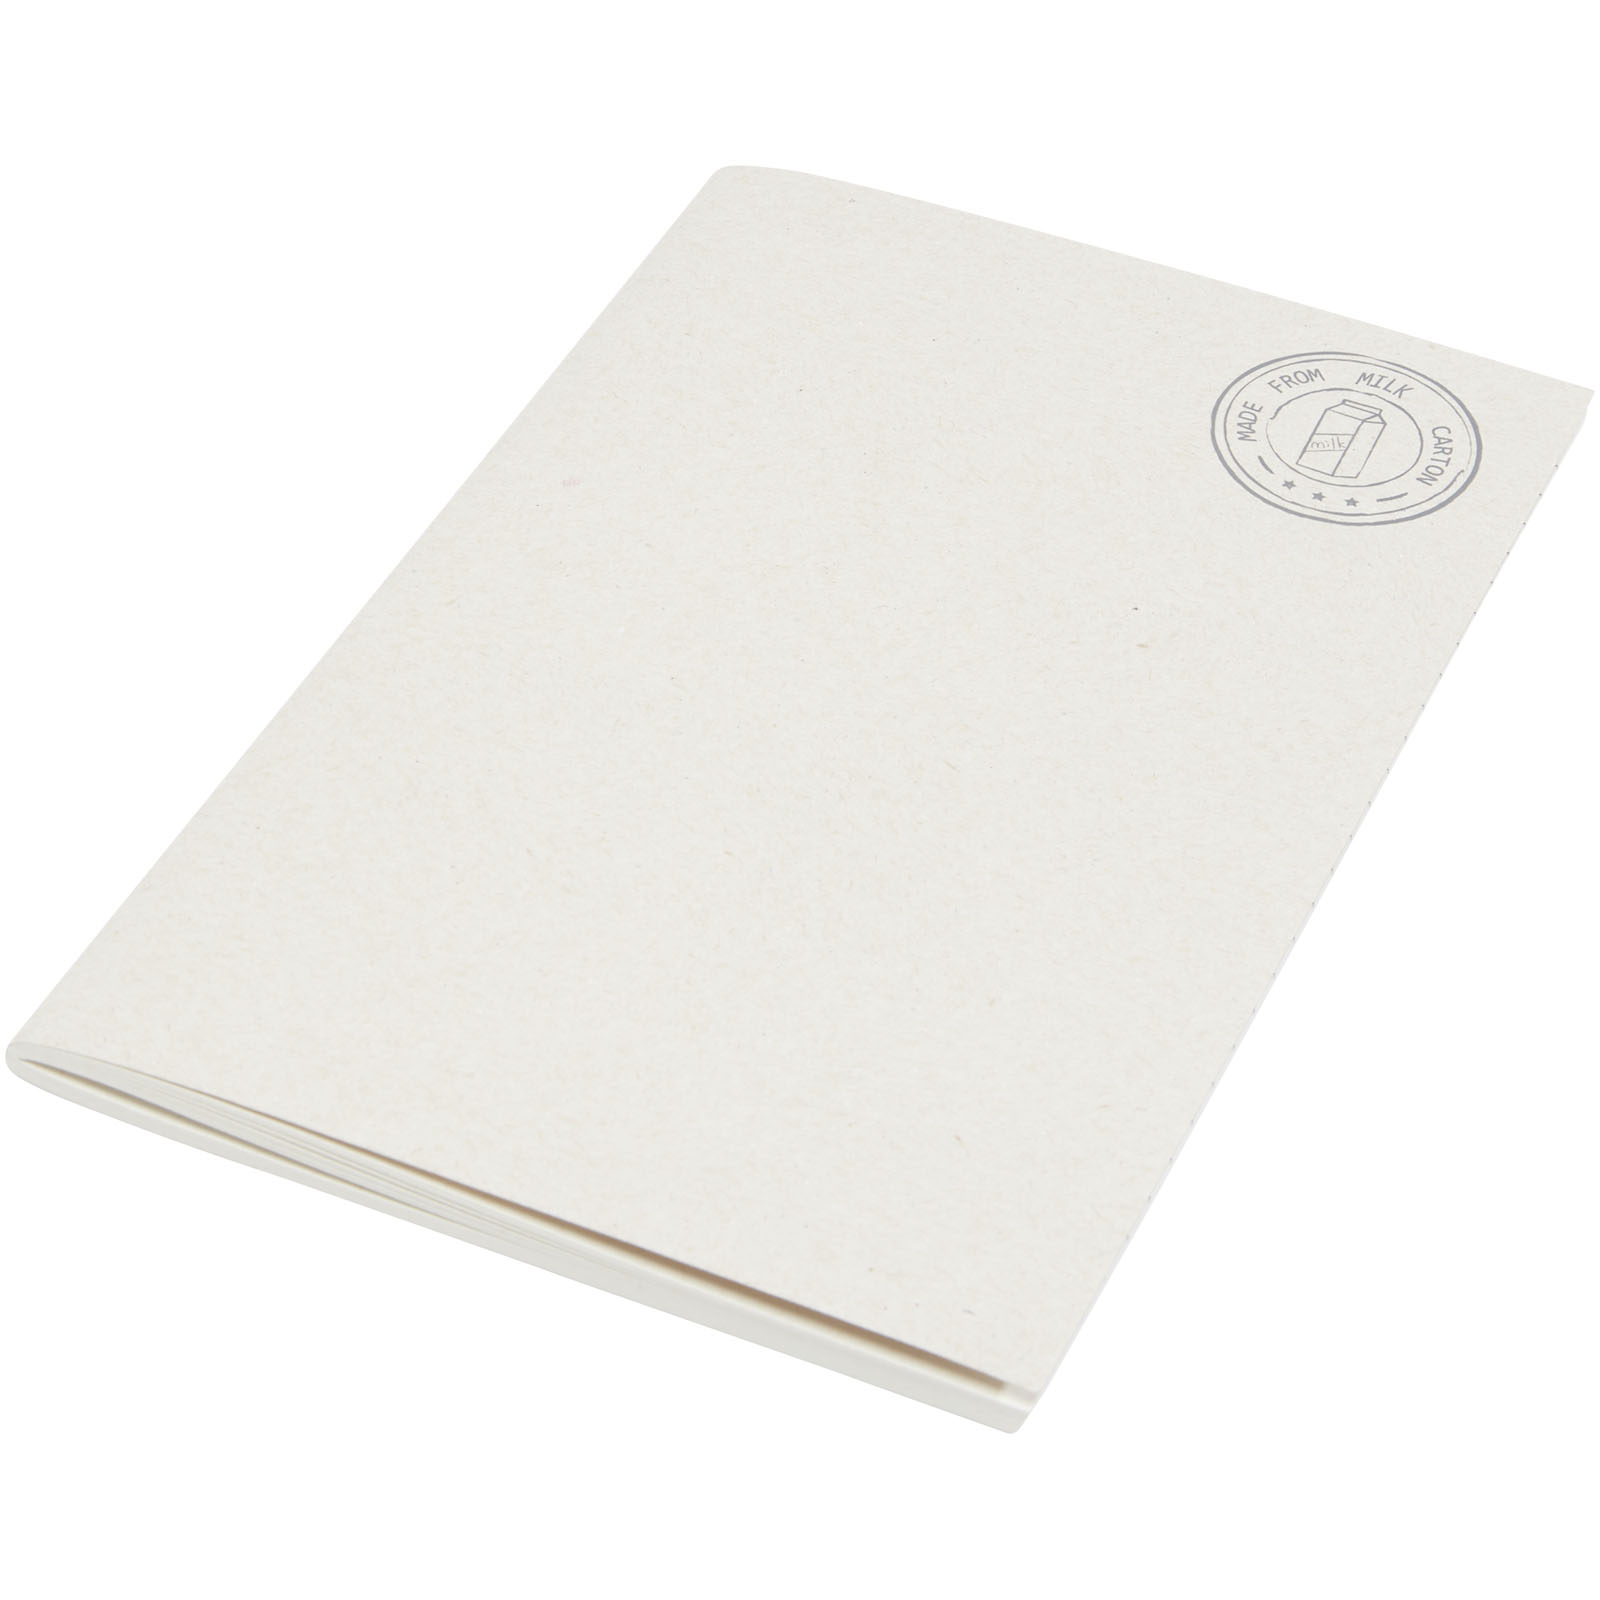 Notebooks & Desk Essentials - Dairy Dream A5 size reference recycled milk cartons cahier notebook